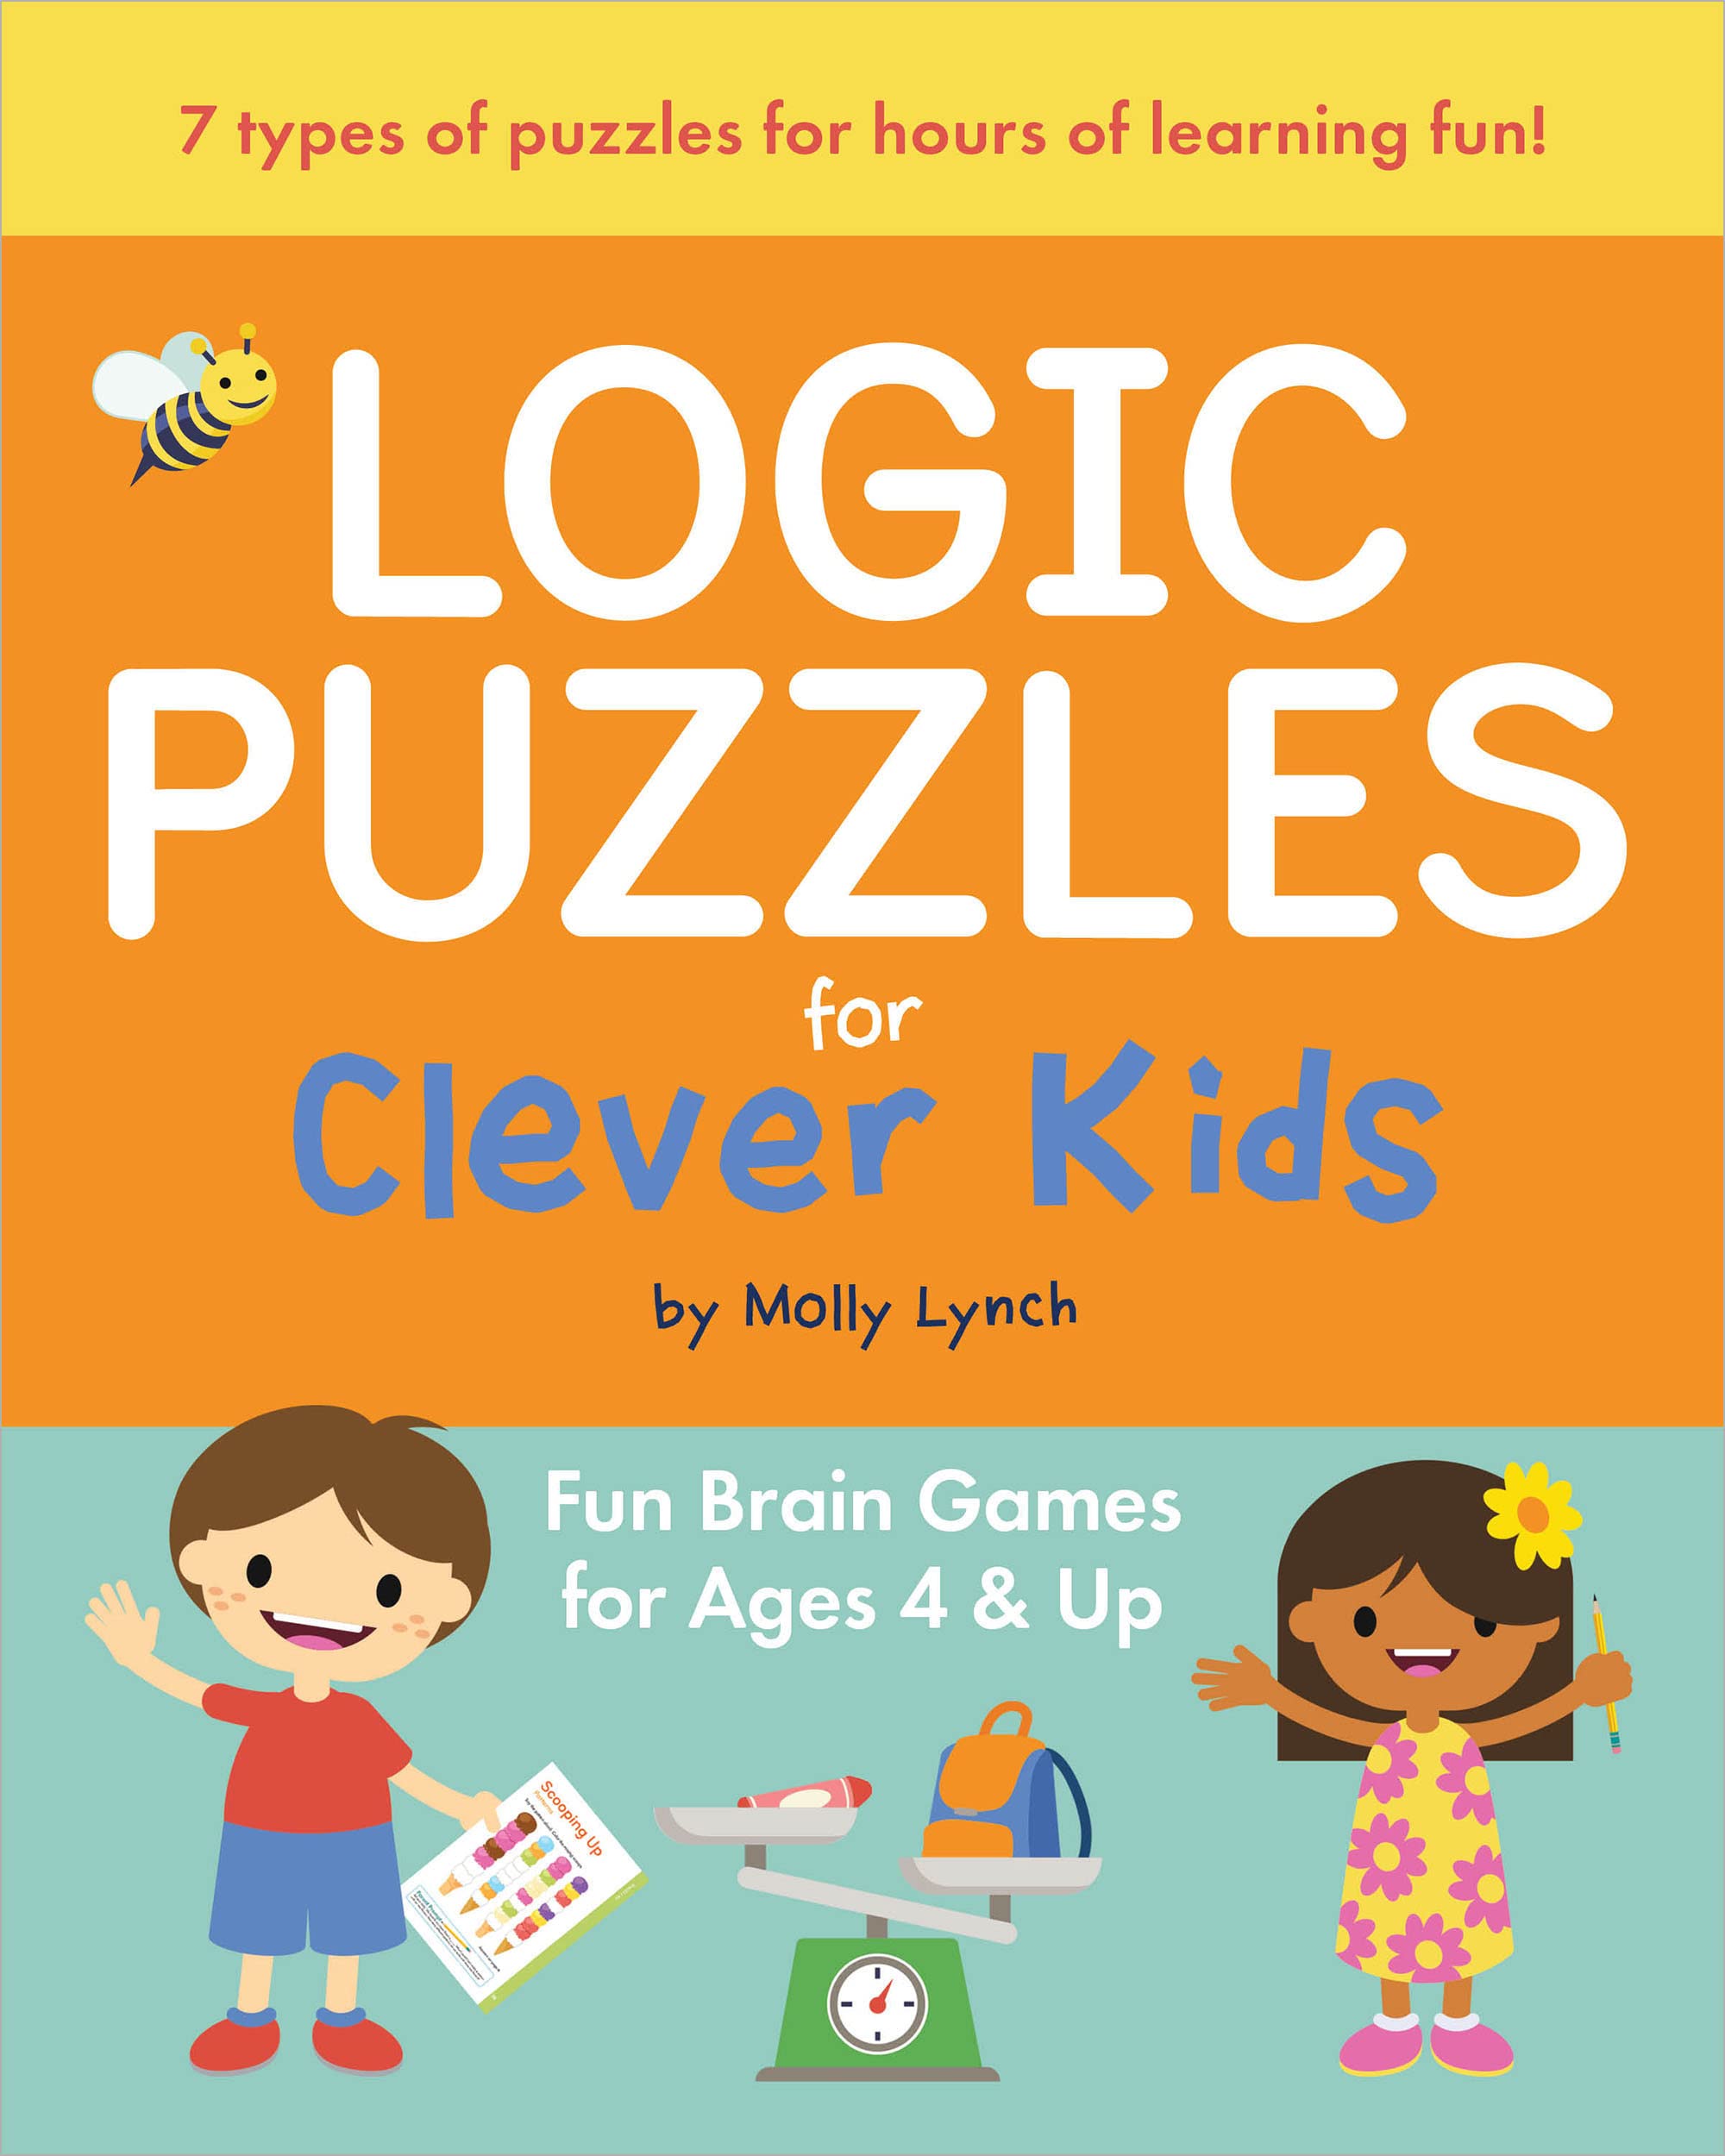 Logic Puzzles for Clever Kids Fun brain games for ages 4 & up